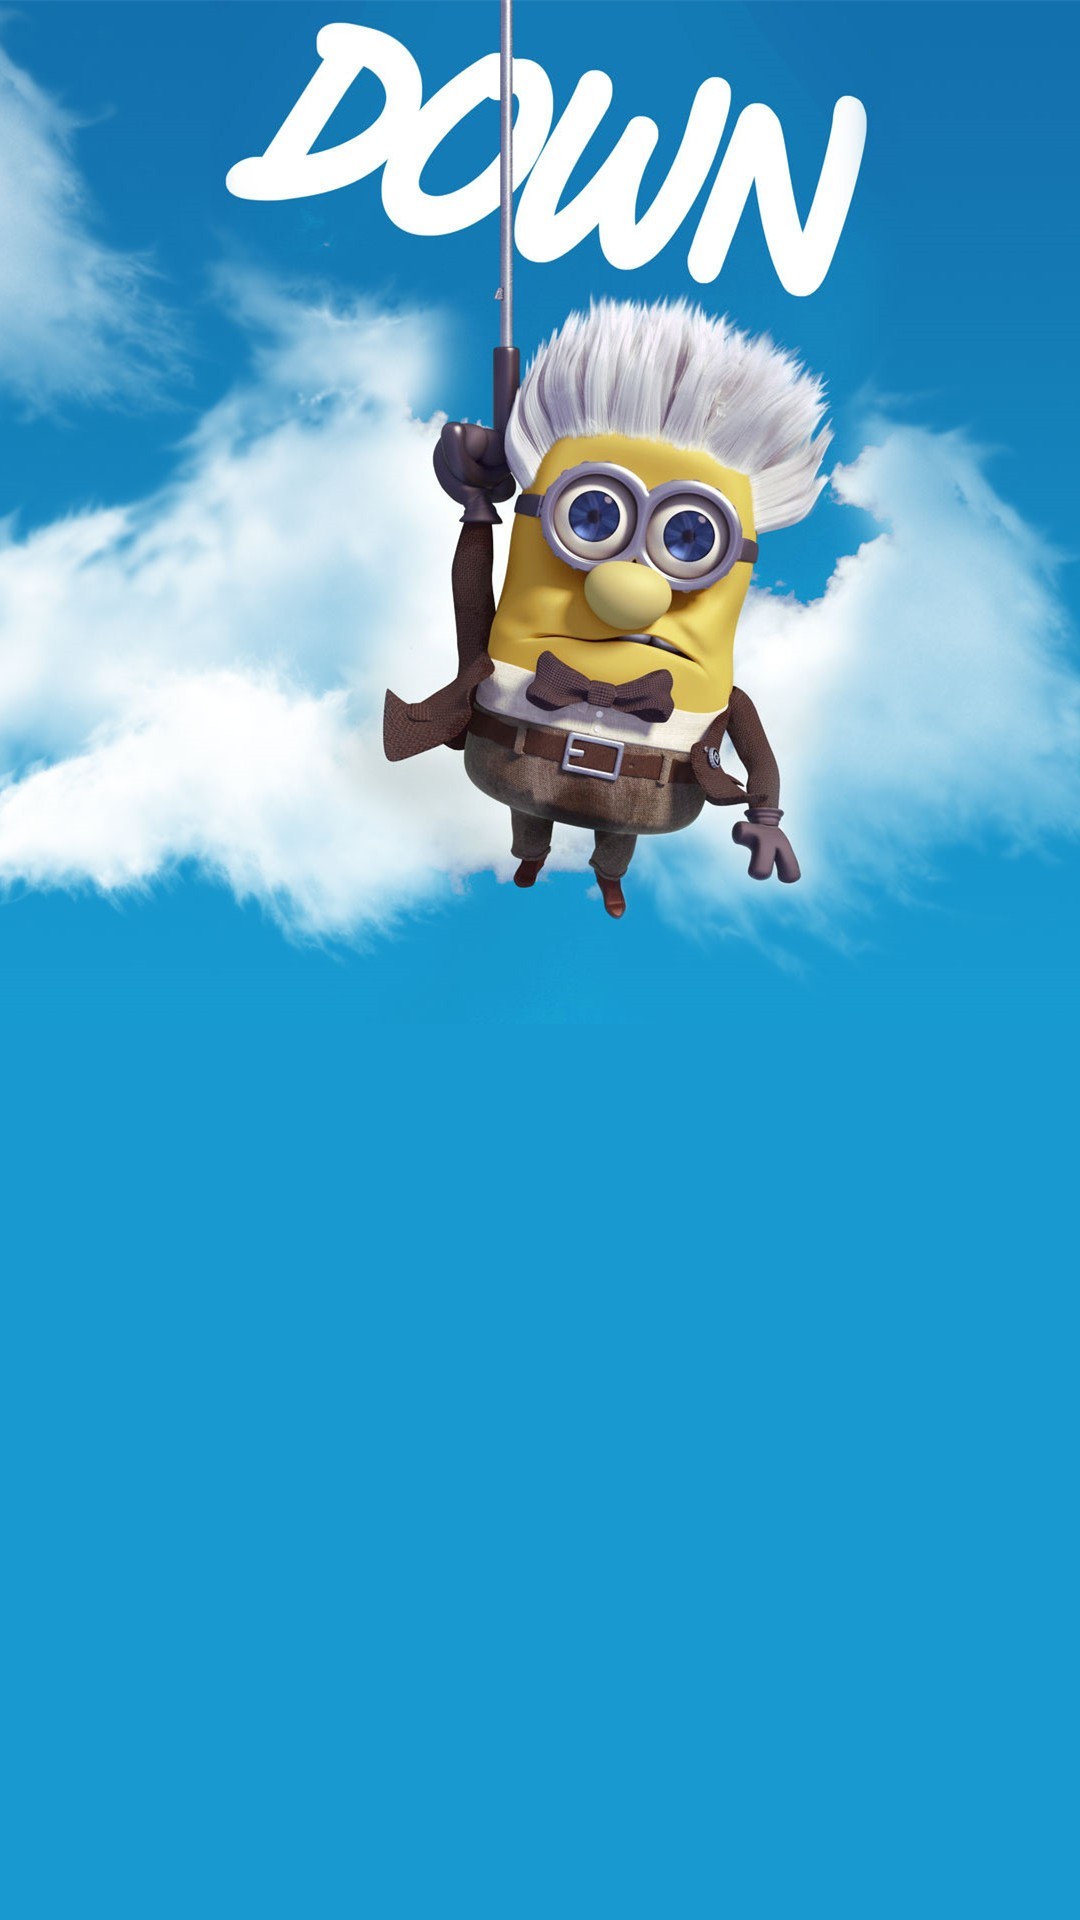 1080x1920 2014 Halloween up movie parody minion iphone 6 plus wallpaper HD -  Despicable Me, down